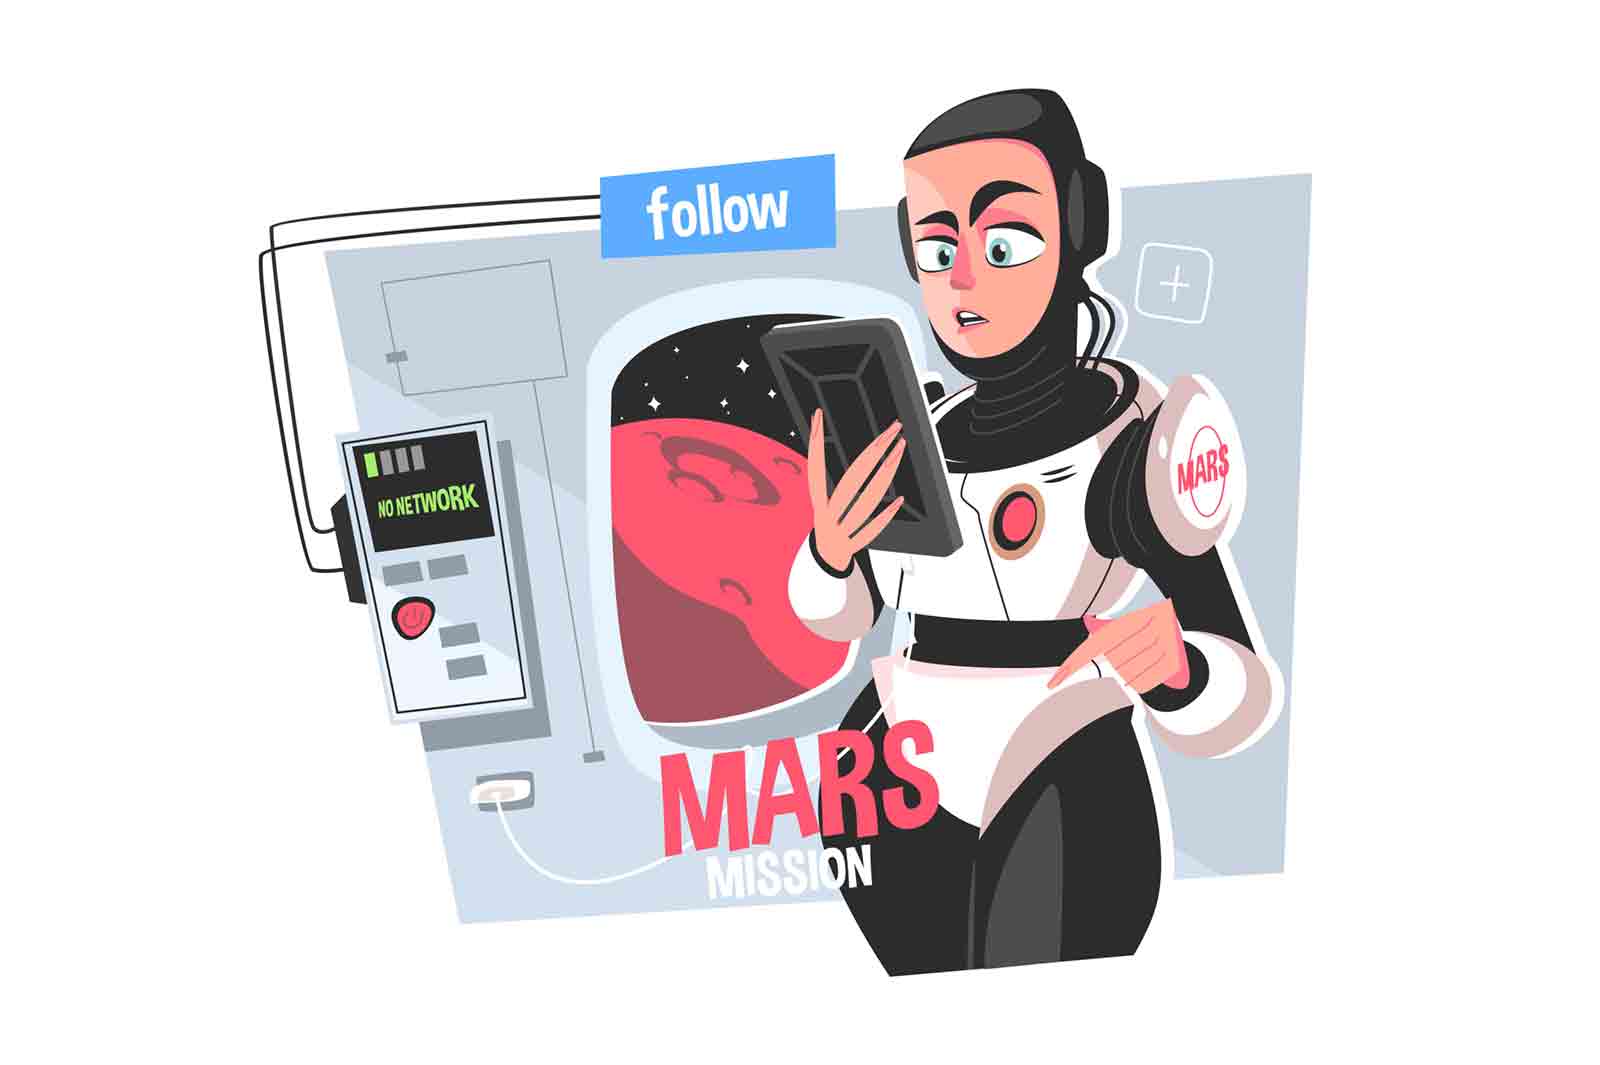 No network connection in space vector illustration. Astronaut girl flying to Mars. Problem of bad connection in cosmos. Woman trying unsuccessfully charging smartphone